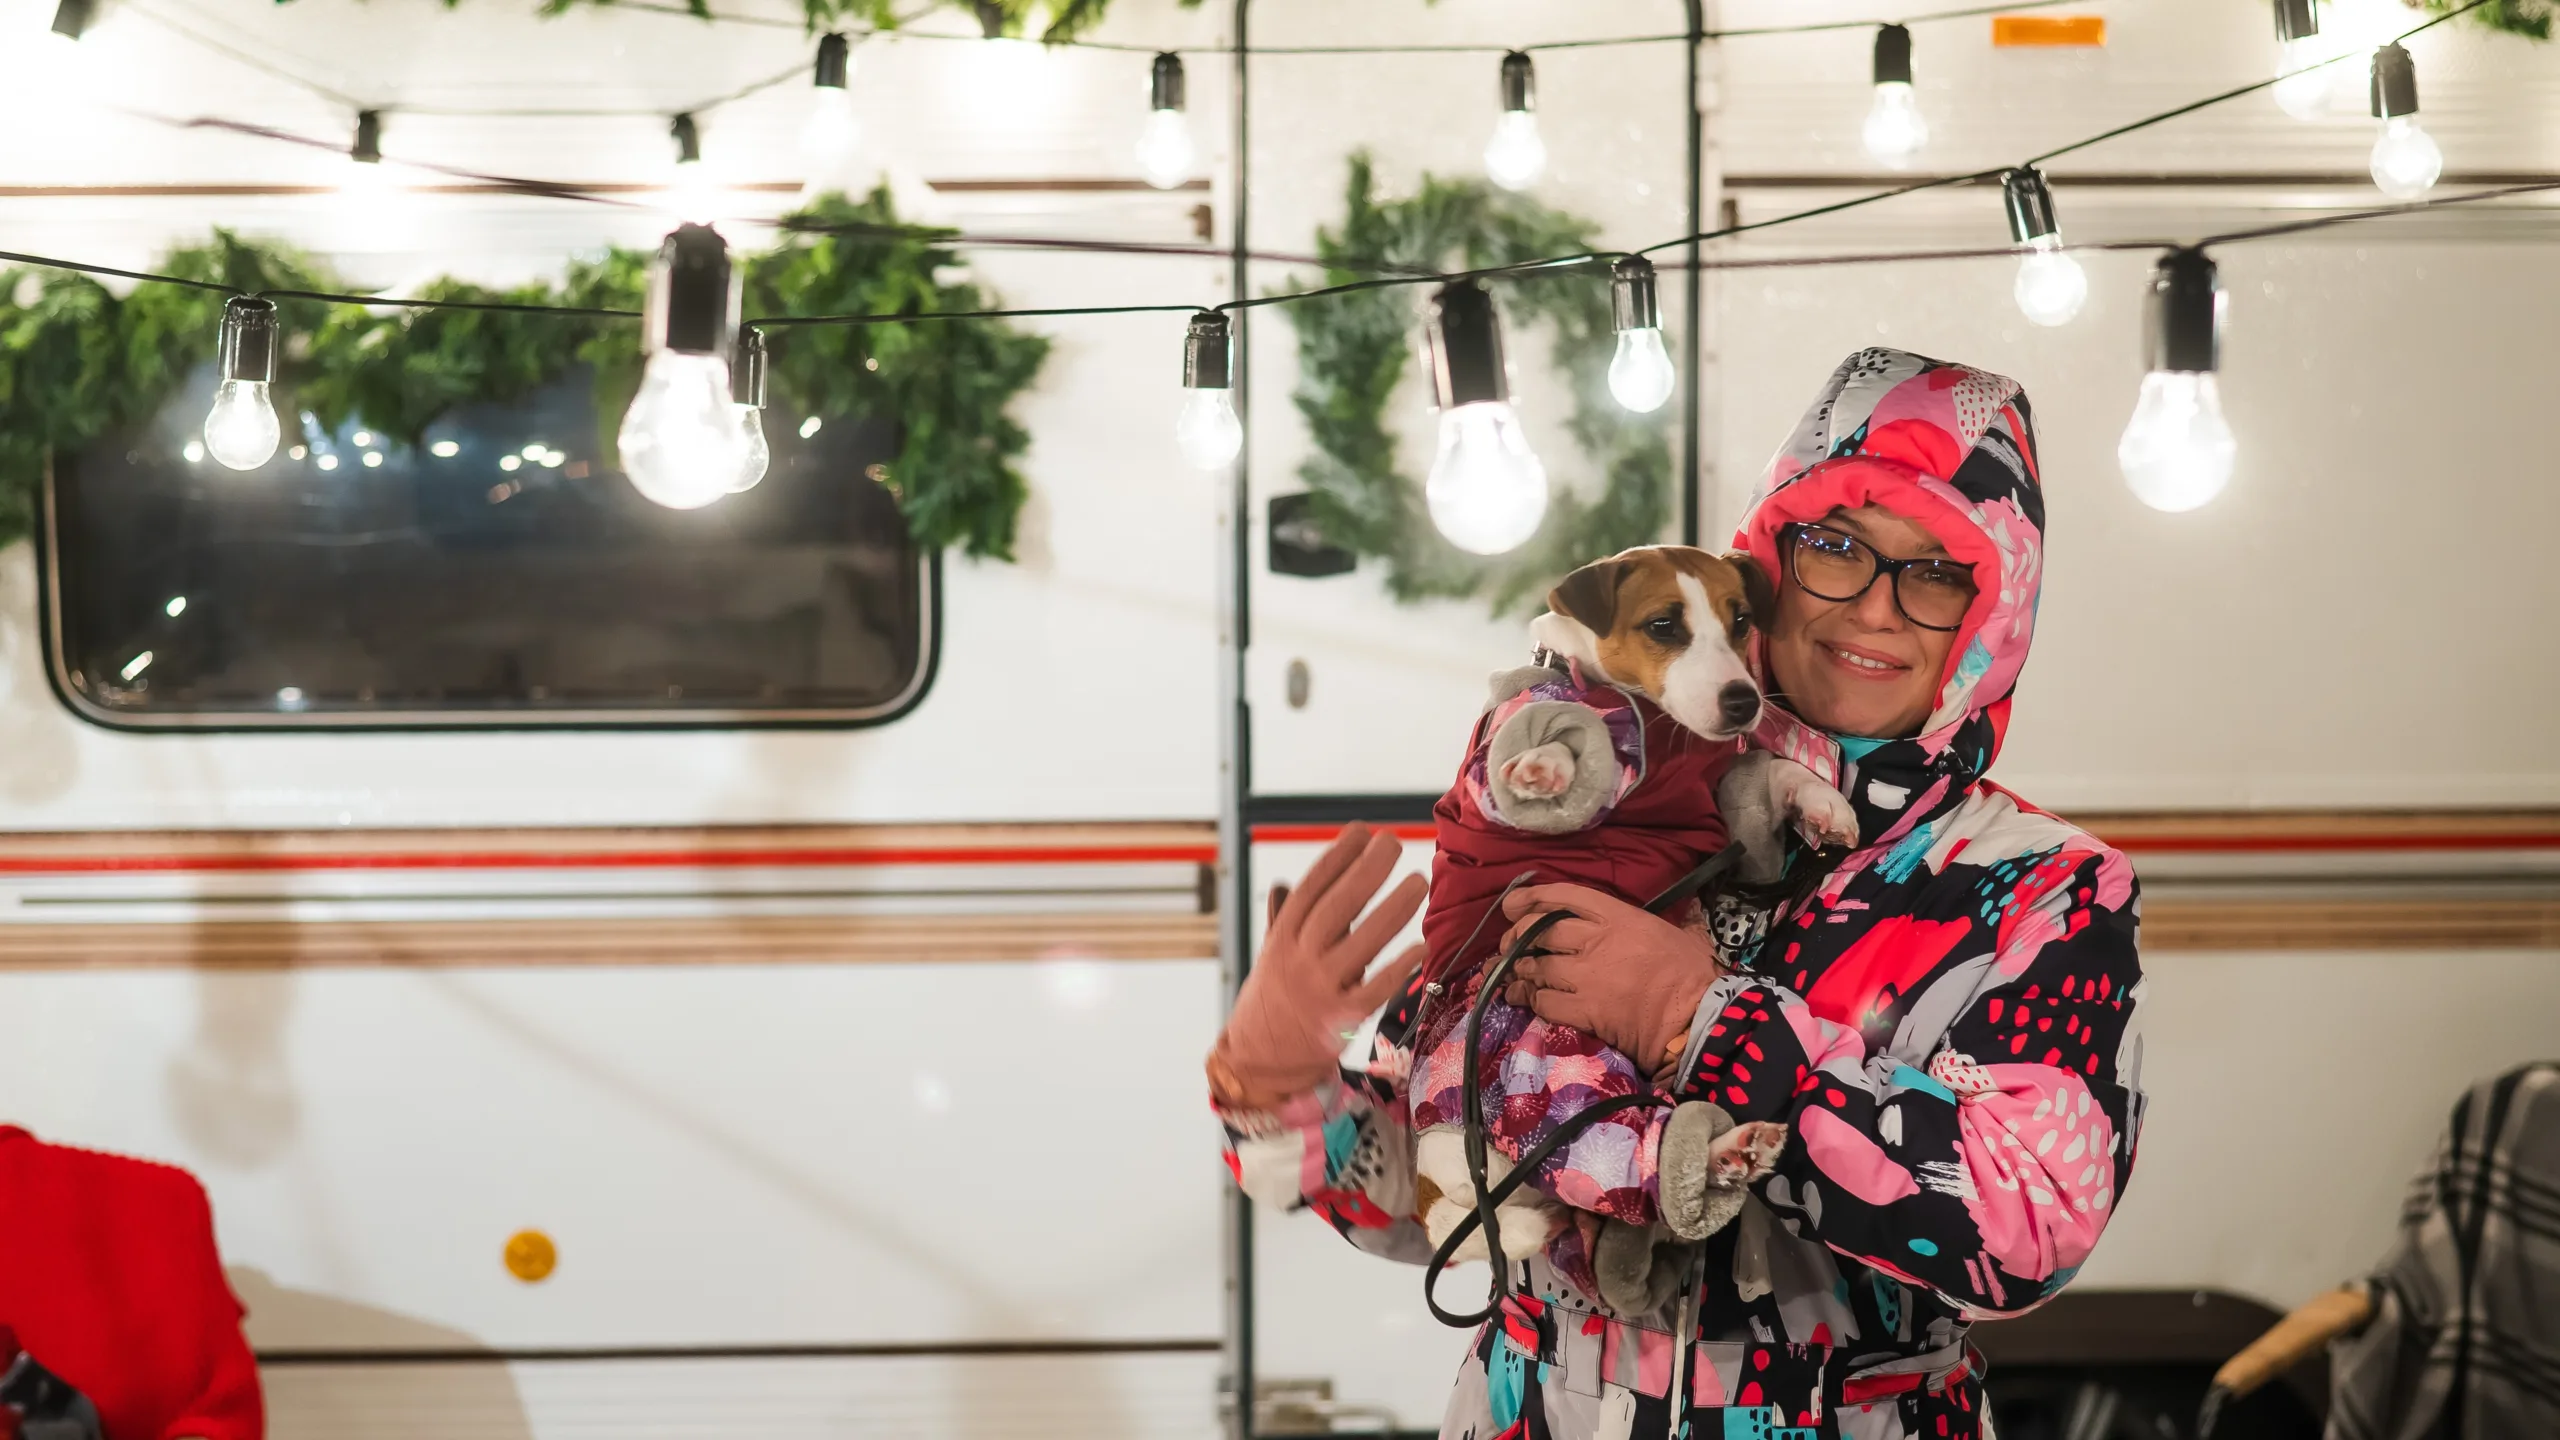 festive woman RVer with dog makes her RV feel like home (Image: Shutterstock)